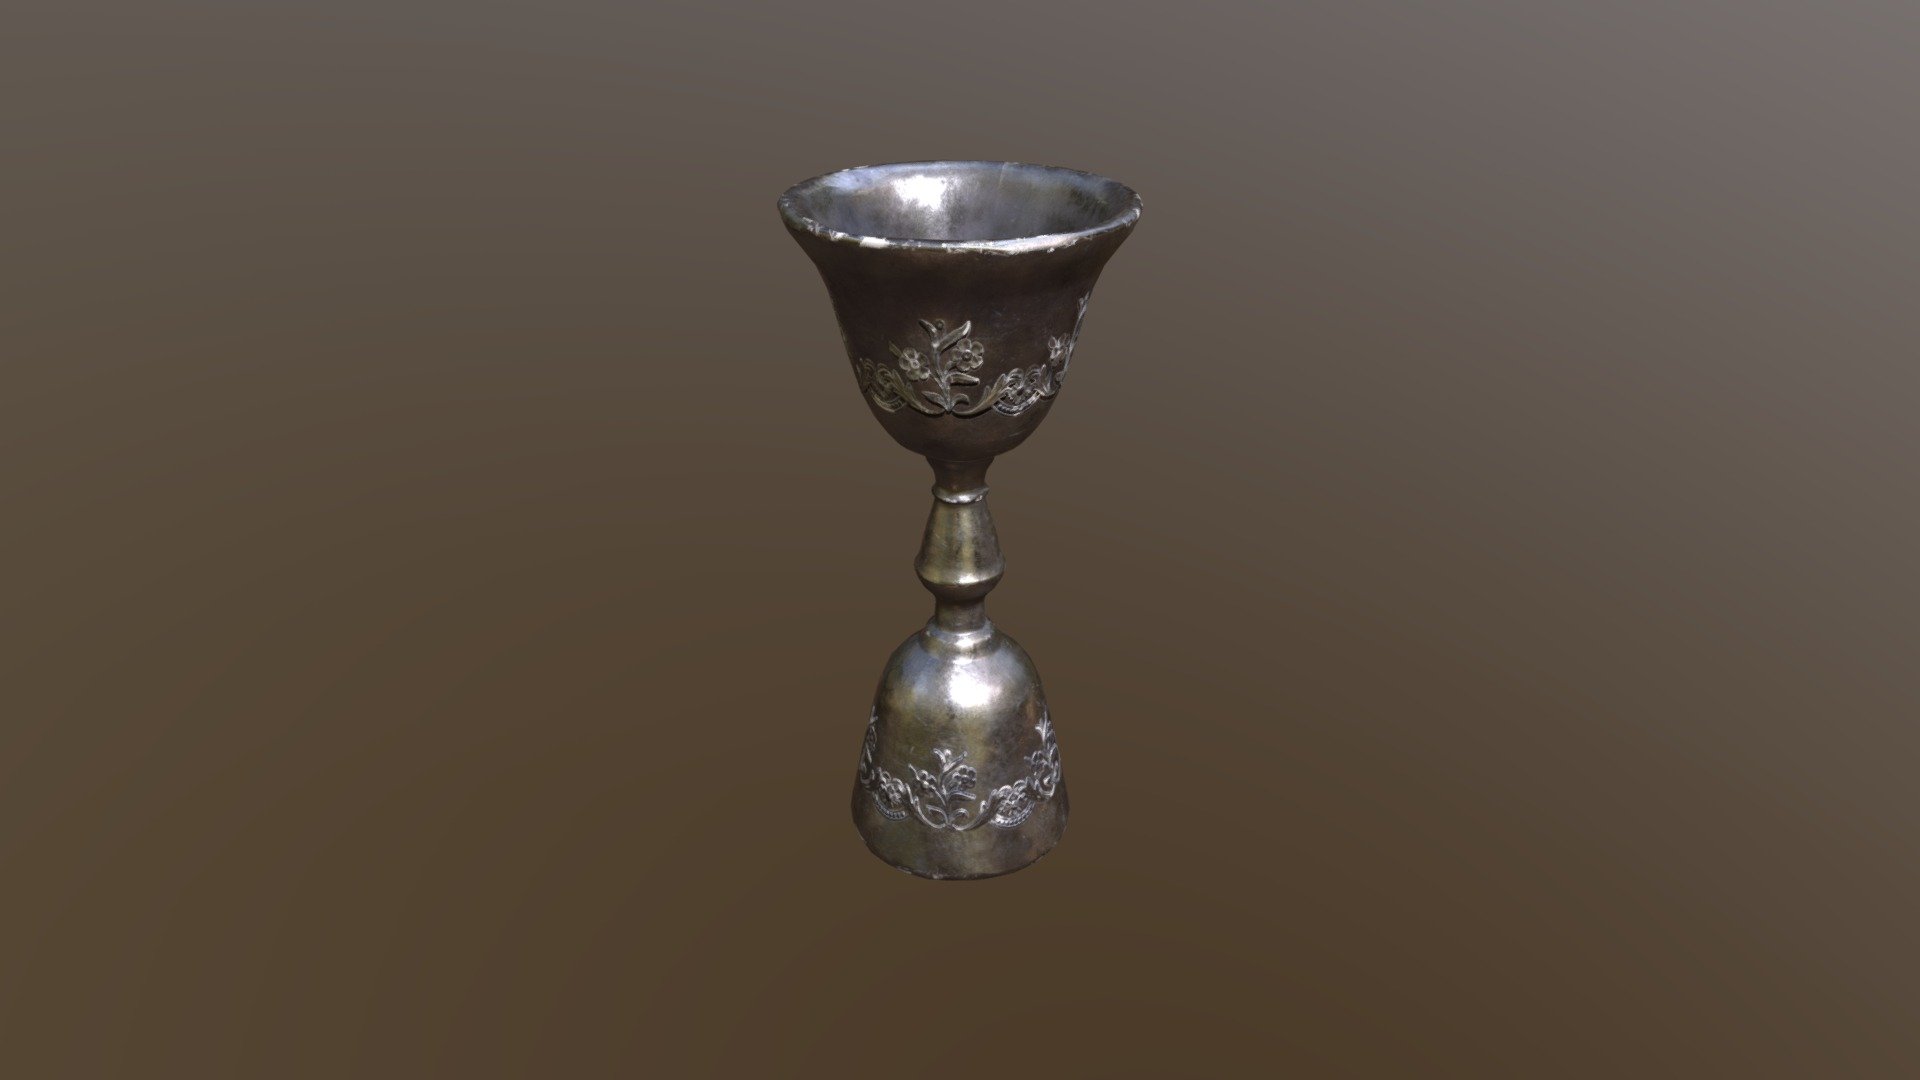 Royal Elegant Skinny Chalice 3D Model. This model contains the Royal Elegant Skinny Chalice itself 

All modeled in Maya, textured with Substance Painter.

The model was built to scale and is UV unwrapped properly. Contains only one 4K texture set.  

⦁   5184 tris. 

⦁   Contains: .FBX .OBJ and .DAE

⦁   Model has clean topology. No Ngons.

⦁   Built to scale

⦁   Unwrapped UV Map

⦁   4K Texture set

⦁   High quality details

⦁   Based on real life references

⦁   Renders done in Marmoset Toolbag

Polycount: 

Verts 2594

Edges 5216

Faces 2624

Tris 5184

If you have any questions please feel free to ask me 3d model